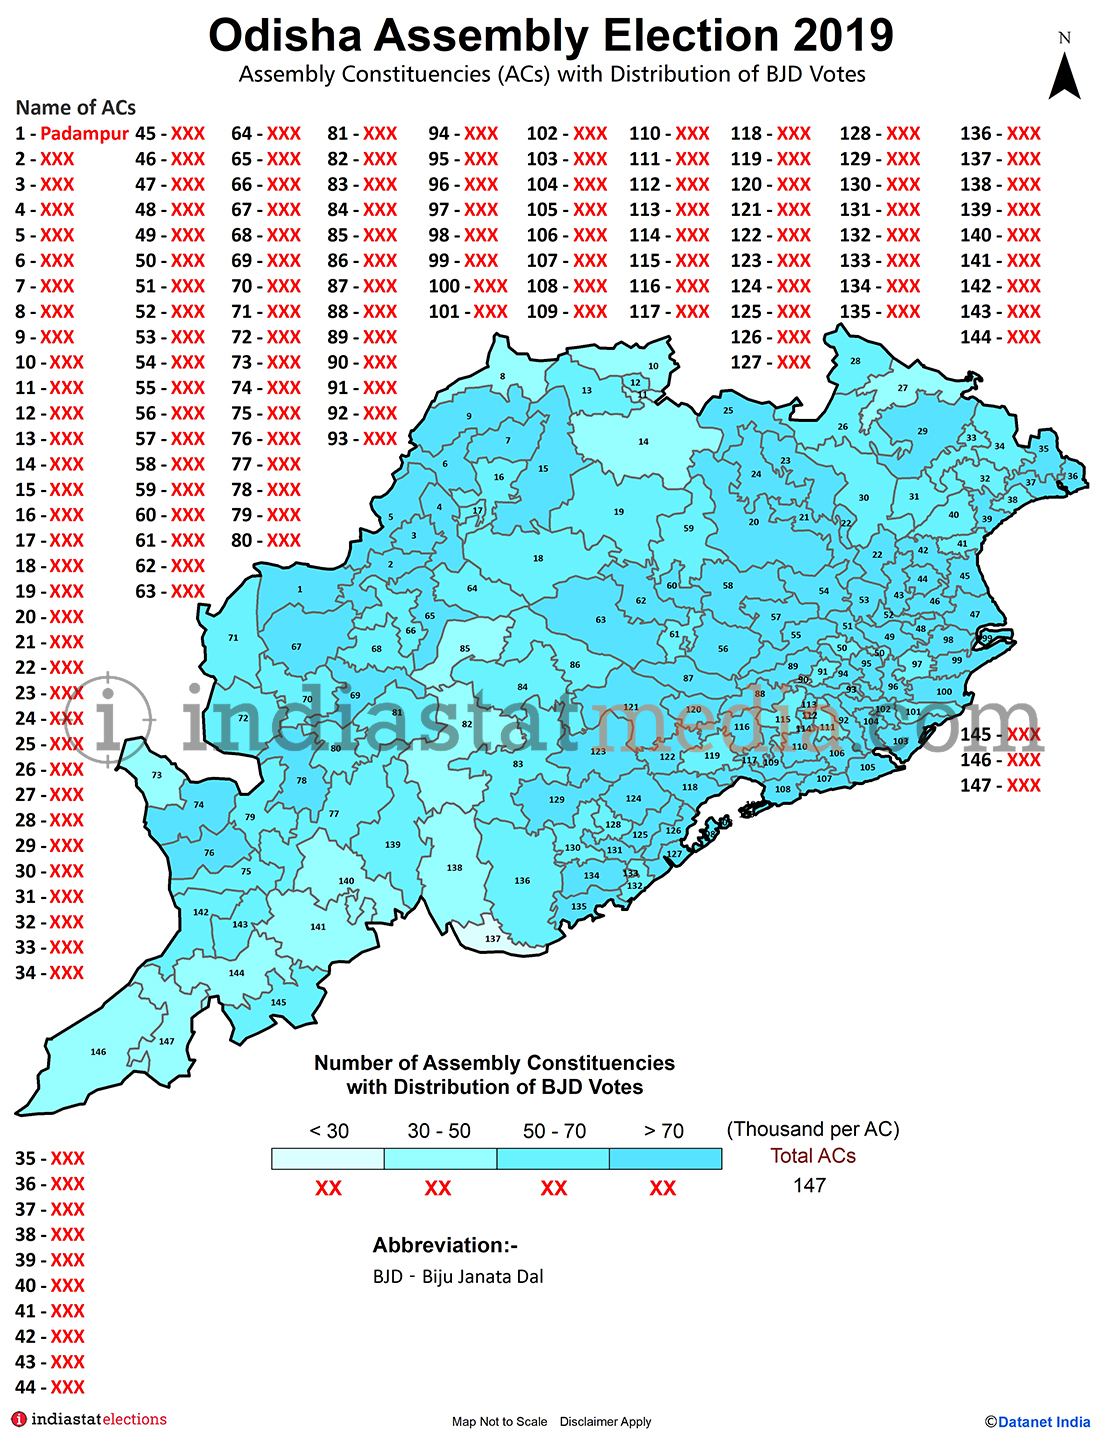 Distribution of BJD Votes by Constituencies in Odisha (Assembly Election - 2019)